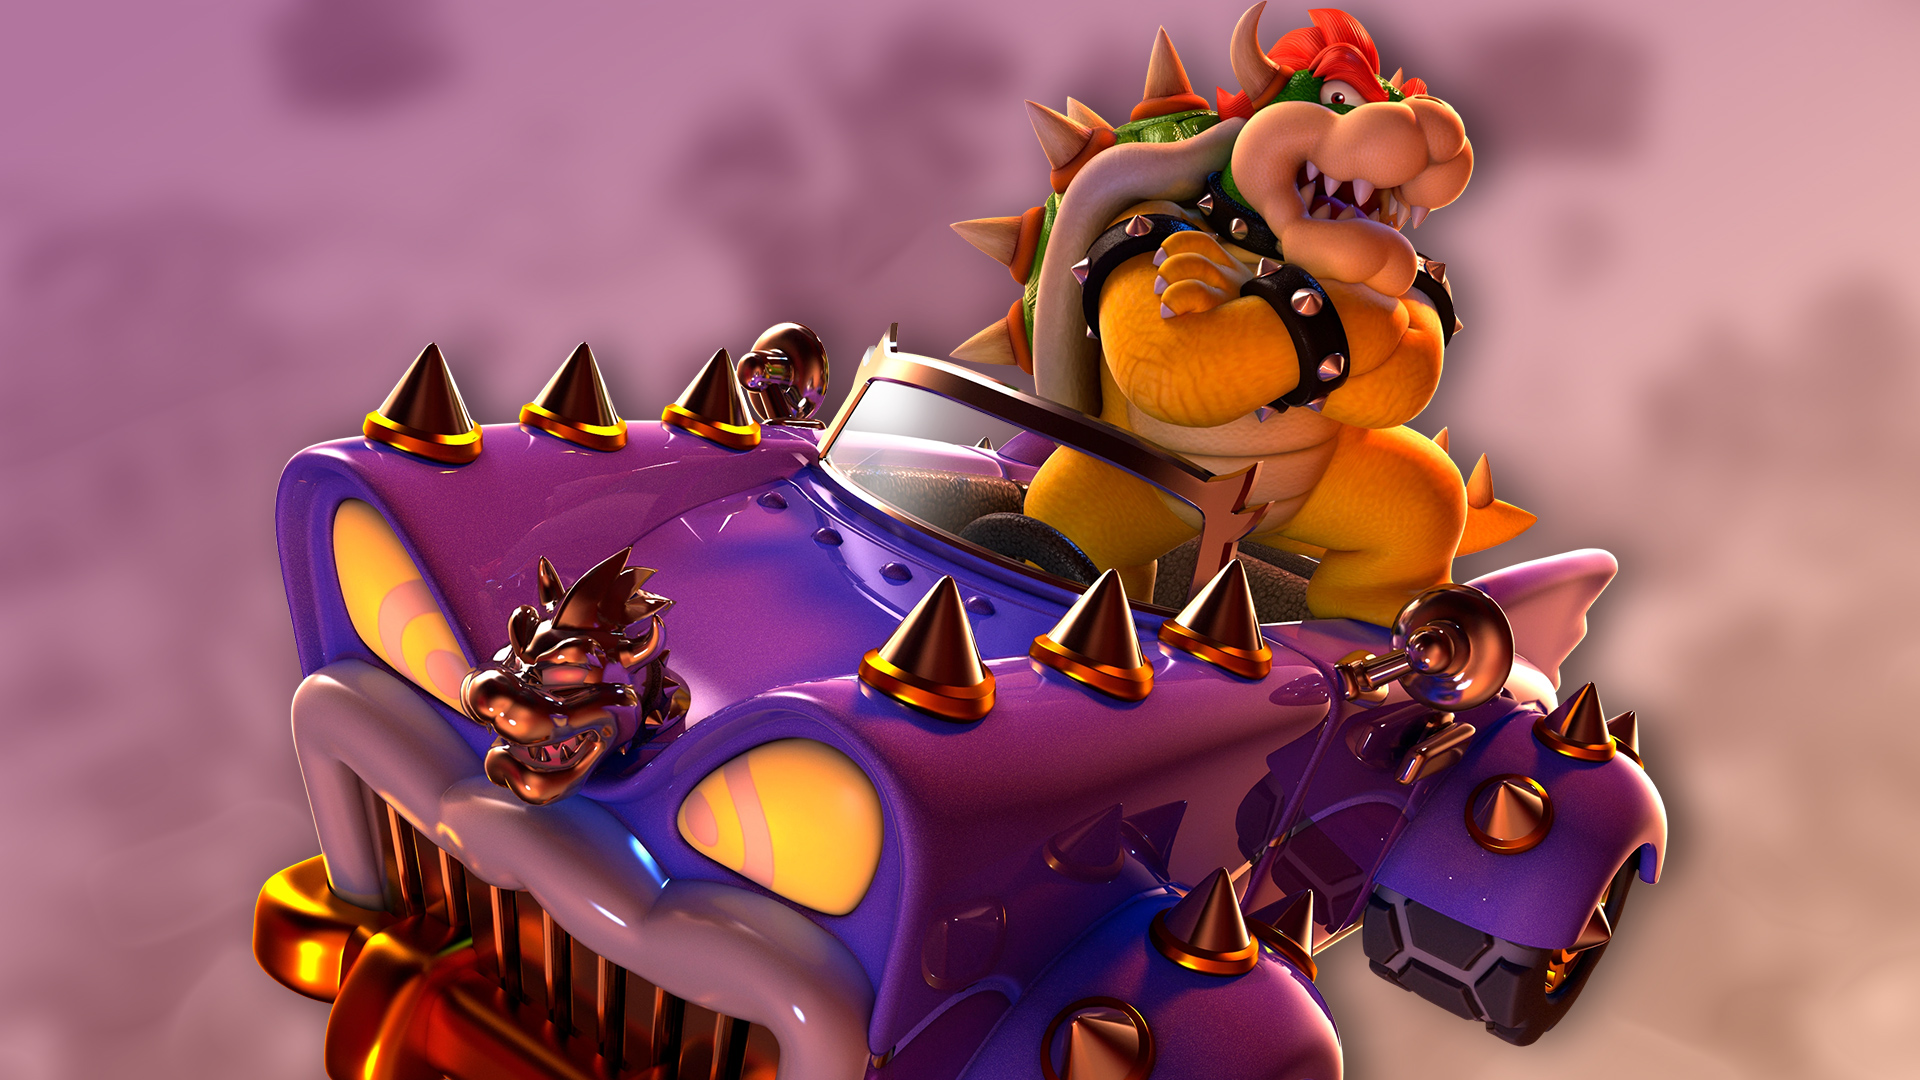 How to Defeat Fury Bowser - Super Mario 3D World Guide - IGN